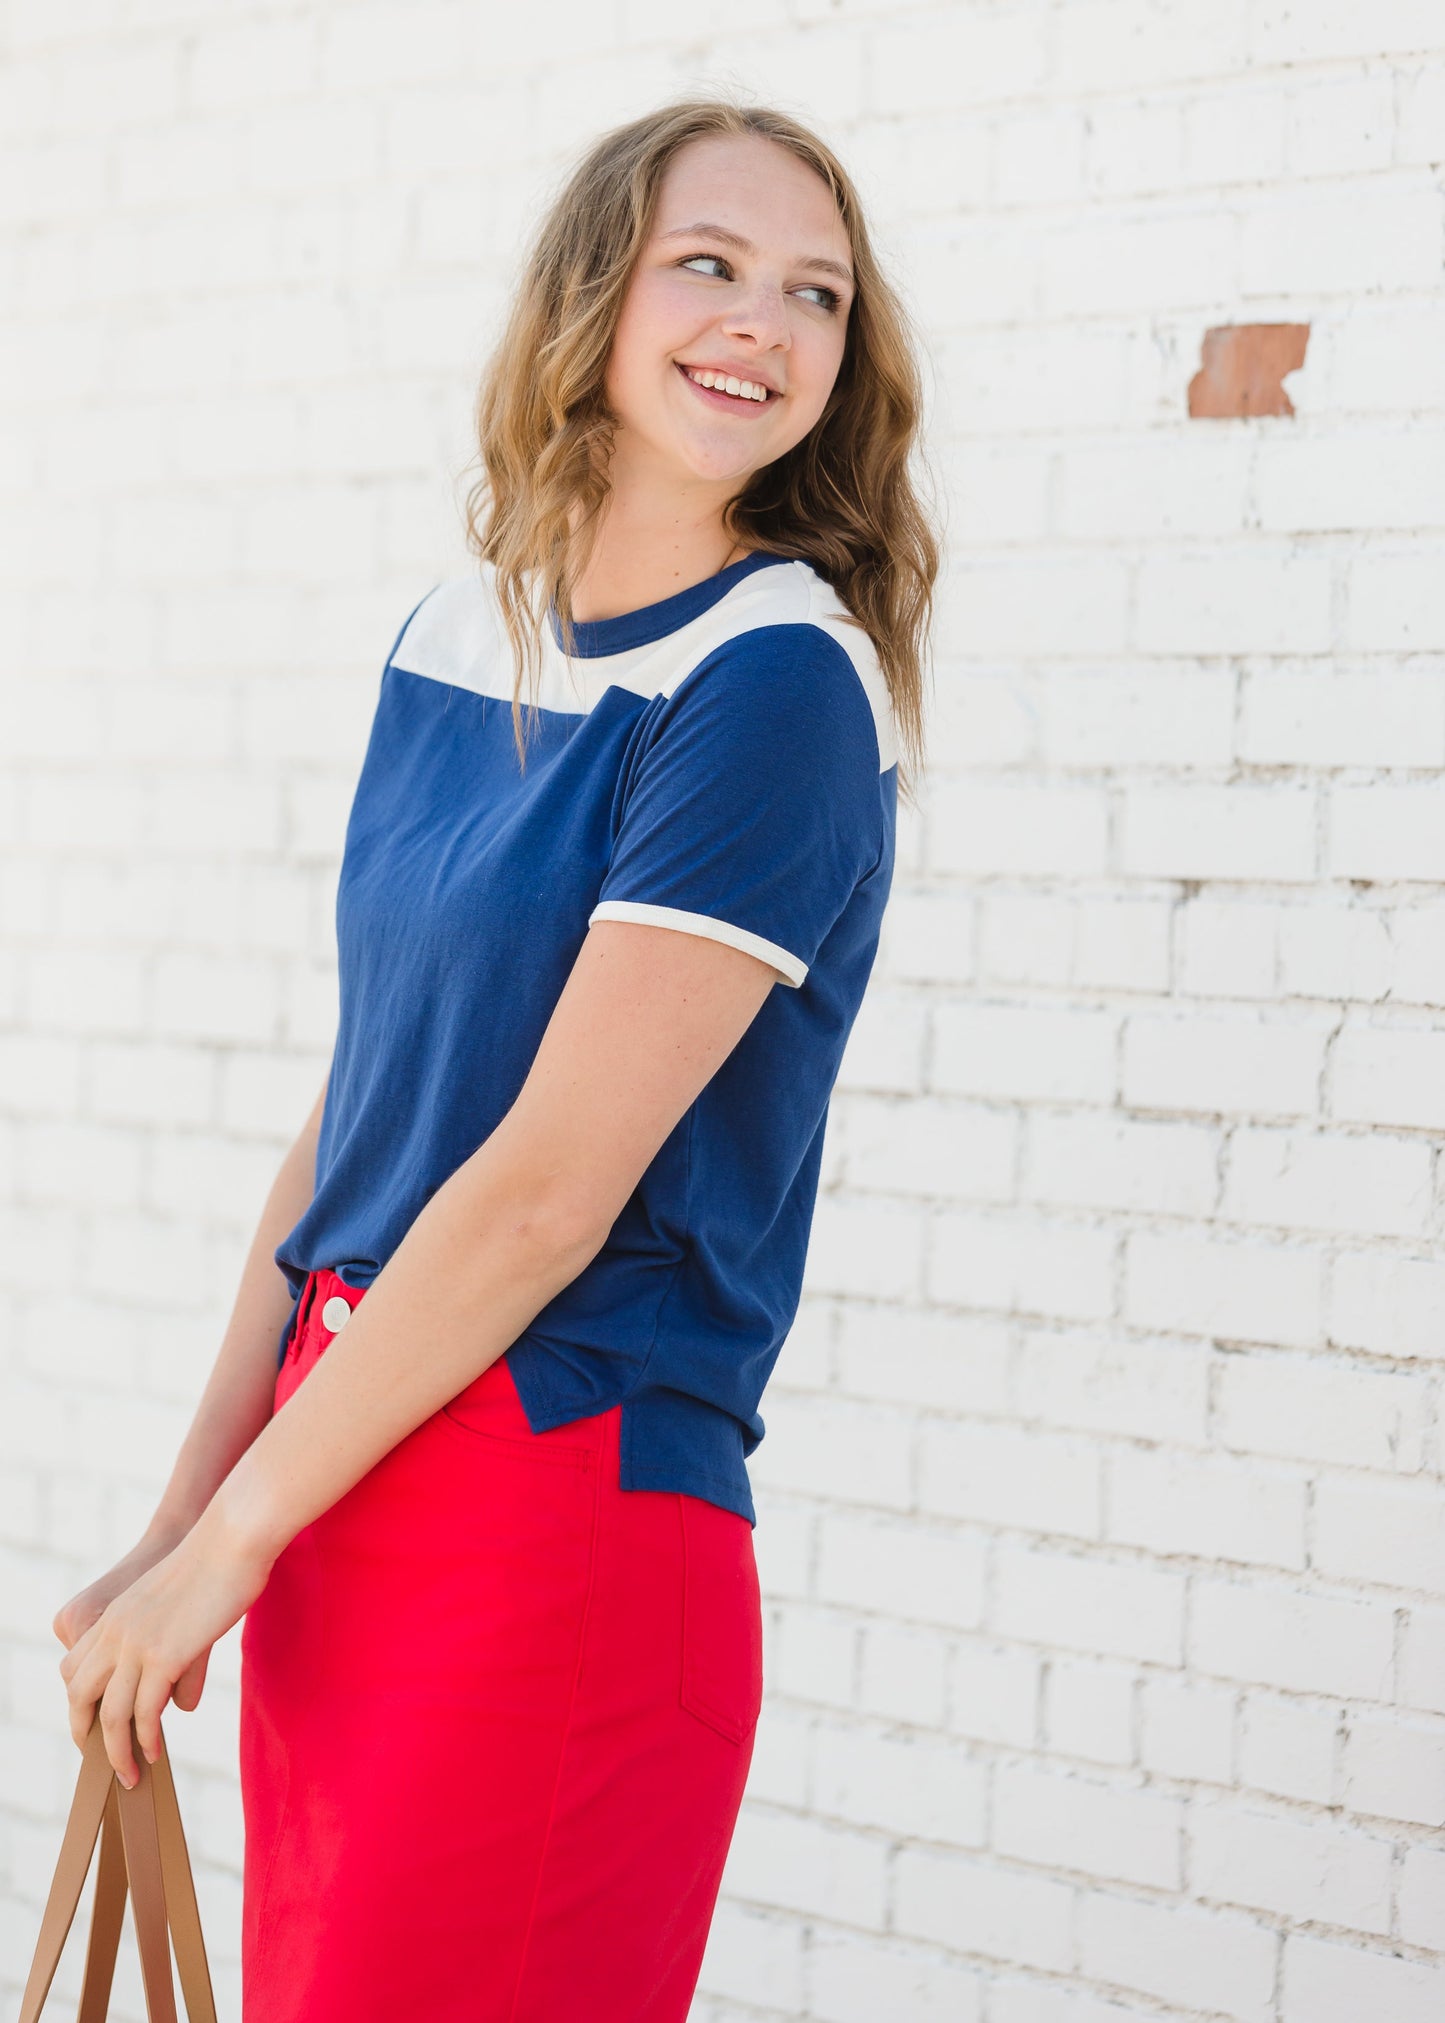 Navy and White Striped Campus Tee - FINAL SALE Tops